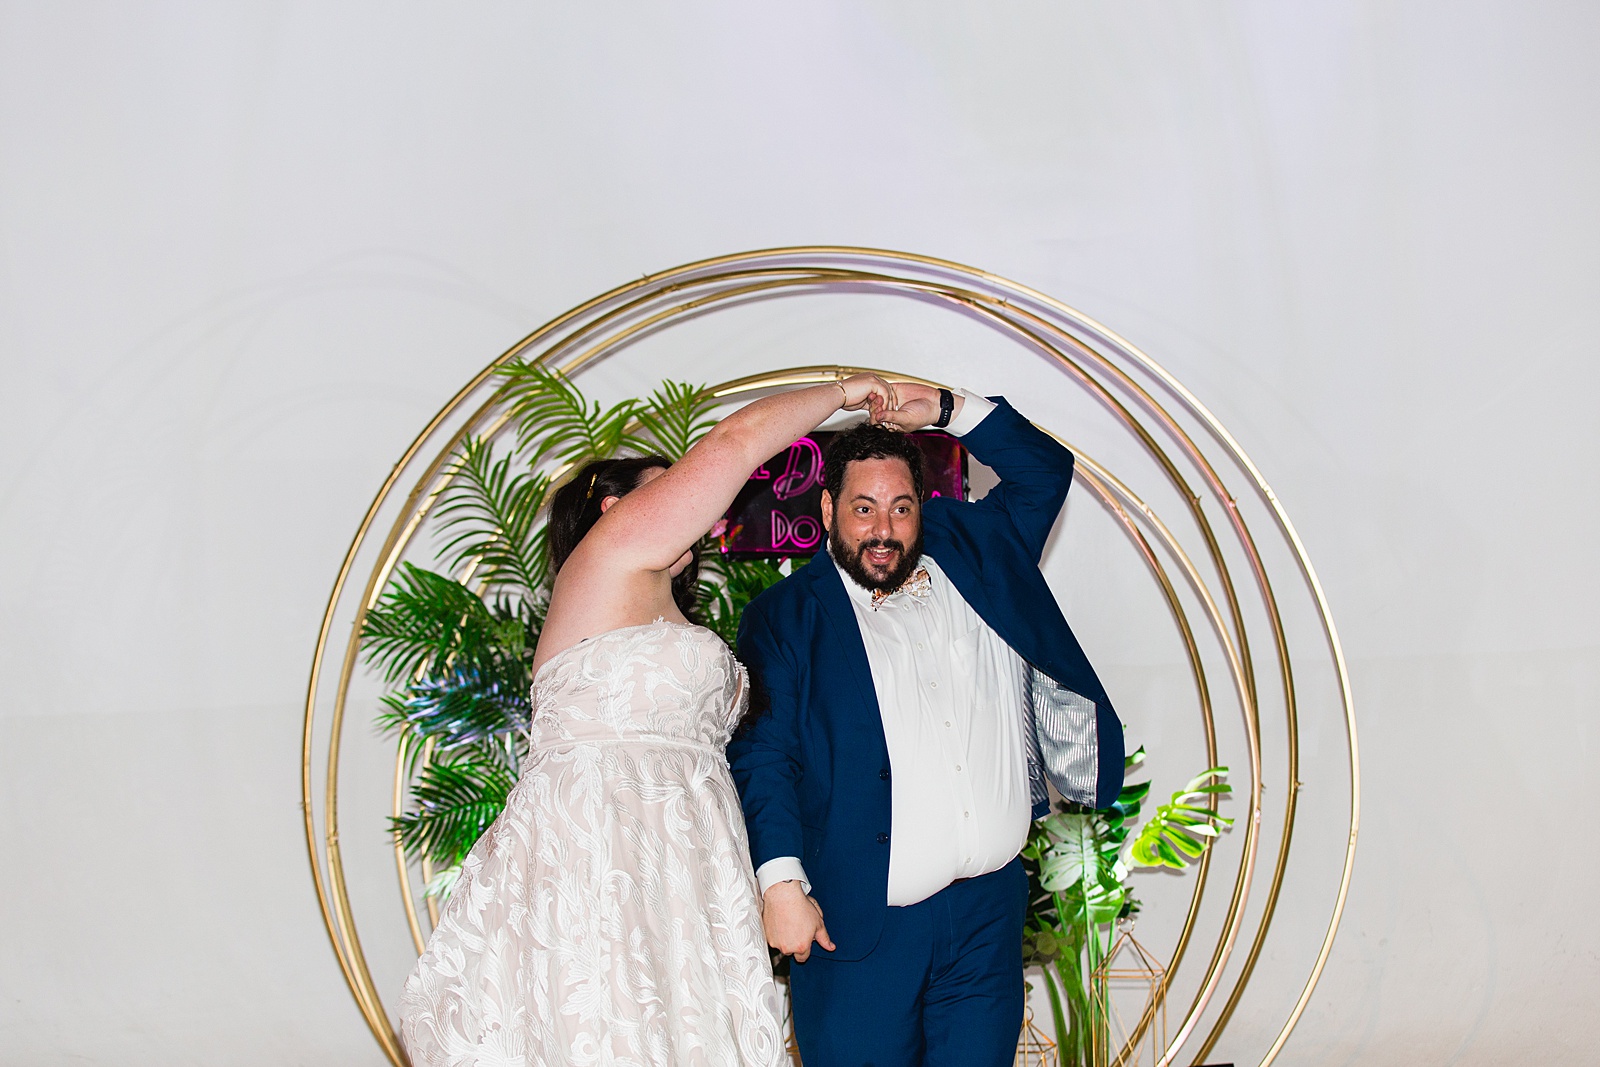 Bride and Groom sharing first dance at their MonOrchid wedding reception by Arizona wedding photographer PMA Photography.